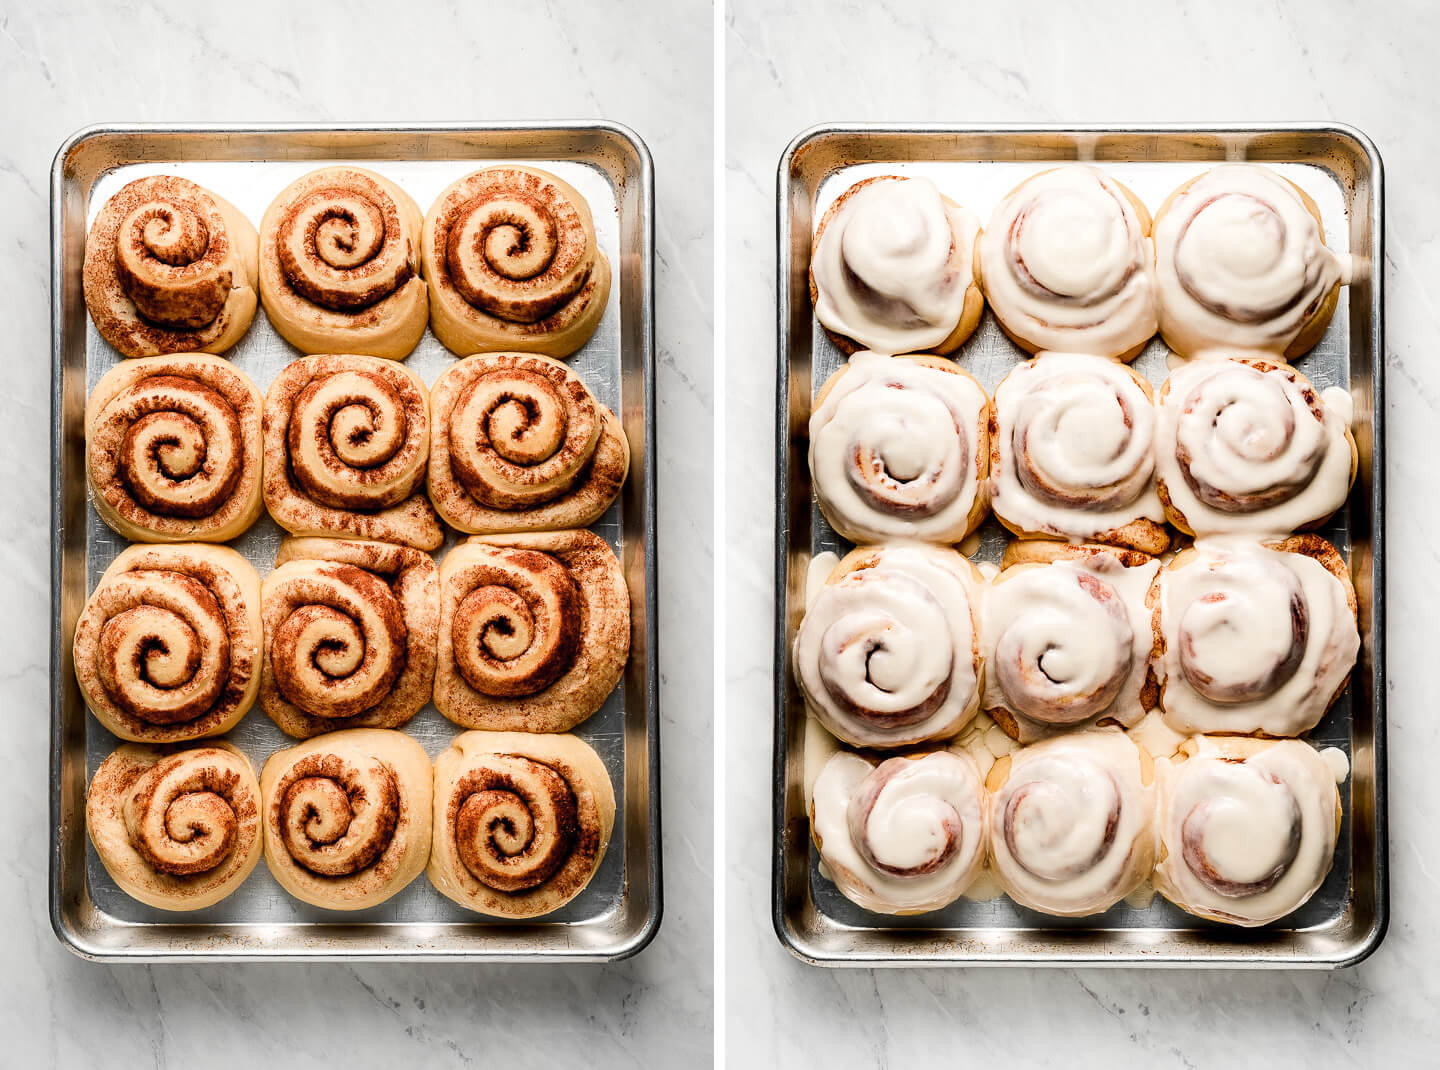 Diptych-Baked cinnamon rolls on a pan; cinnamon rolls covered in icing on a pan.